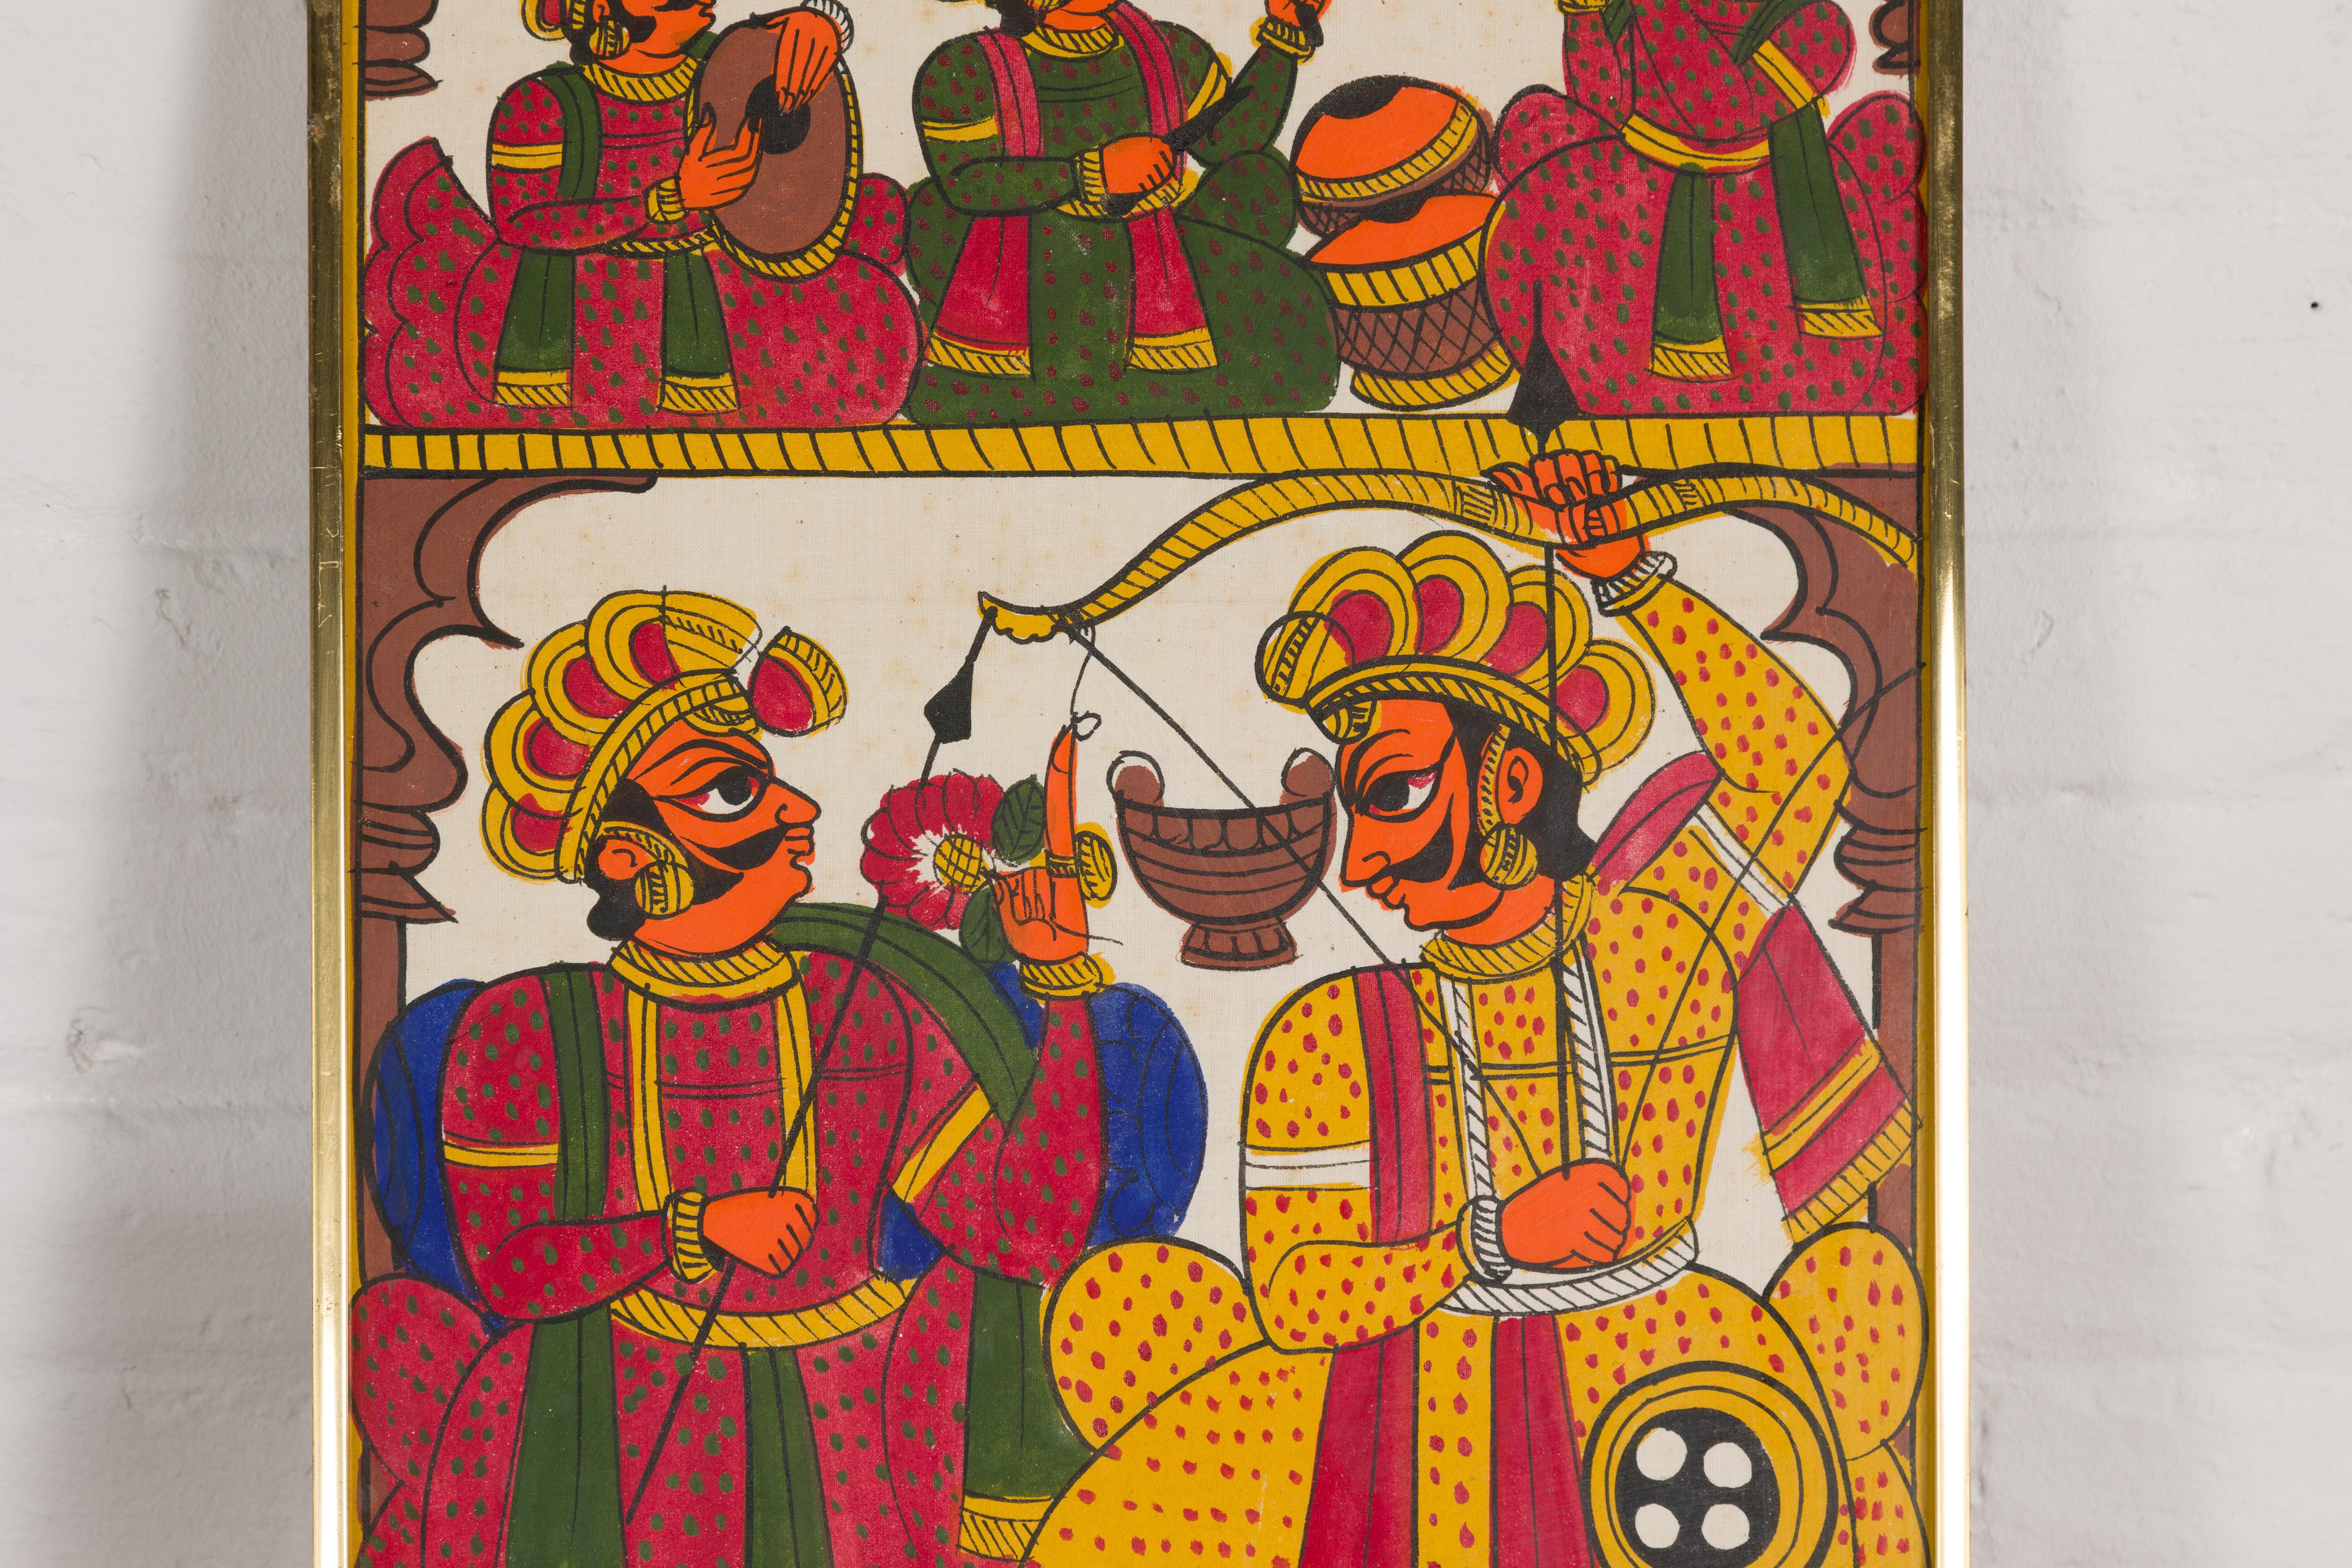 Antique Hand Painted Indian Folk Art Painting Depicting Musicians and Archers In Good Condition For Sale In Yonkers, NY